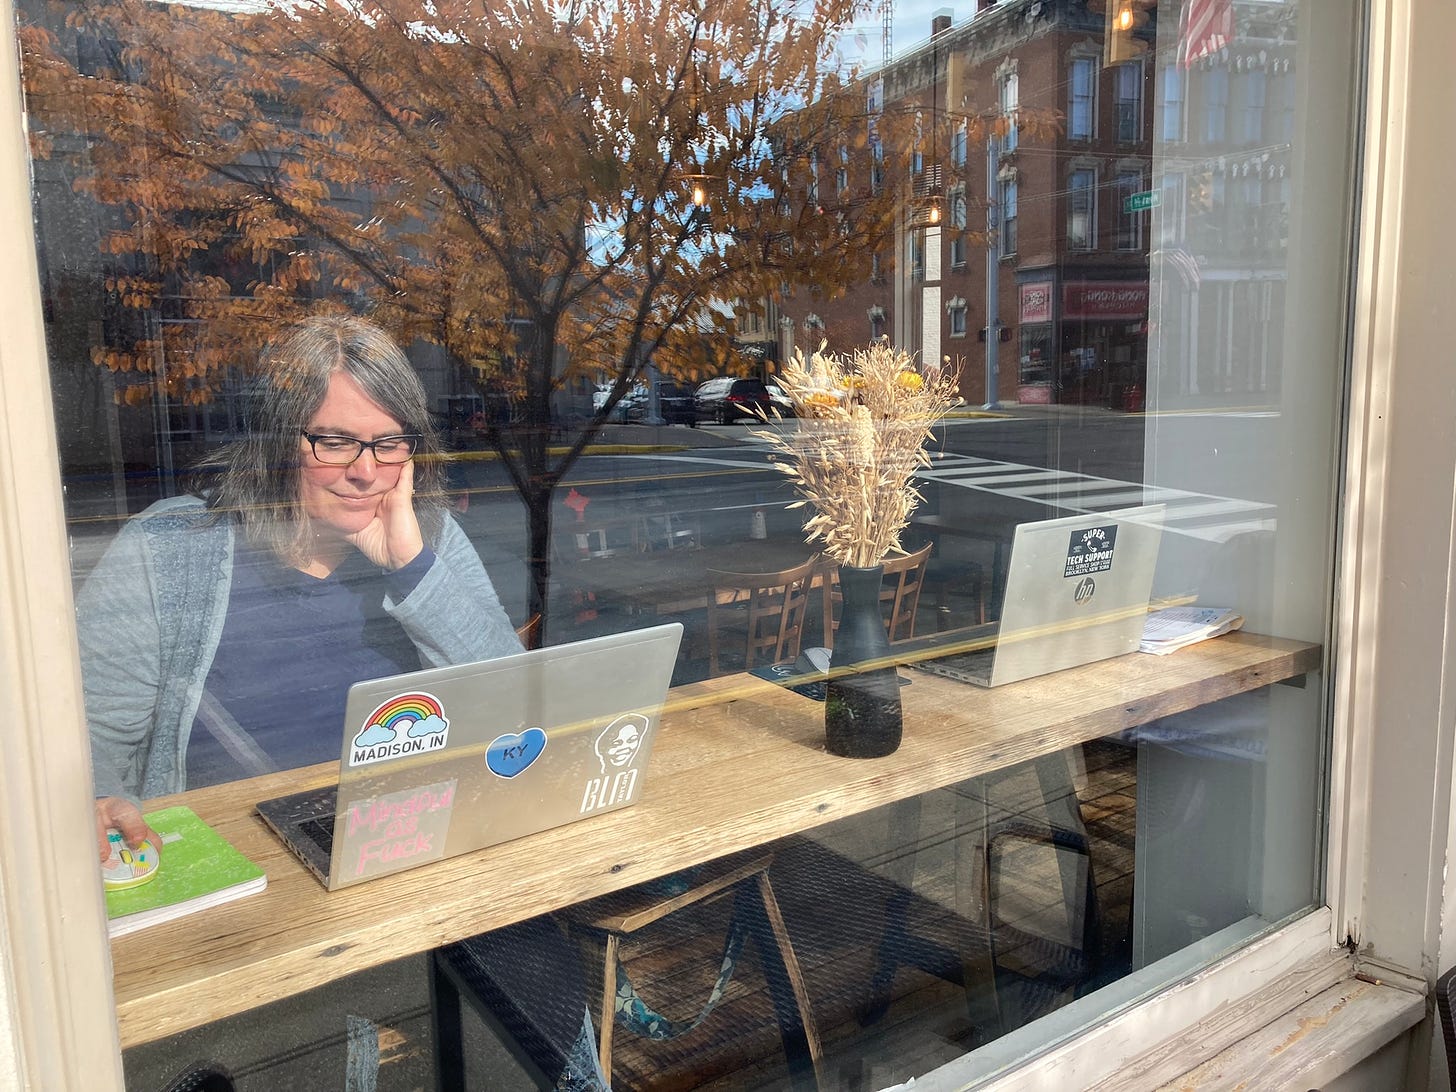 Roby in a coffee shop window